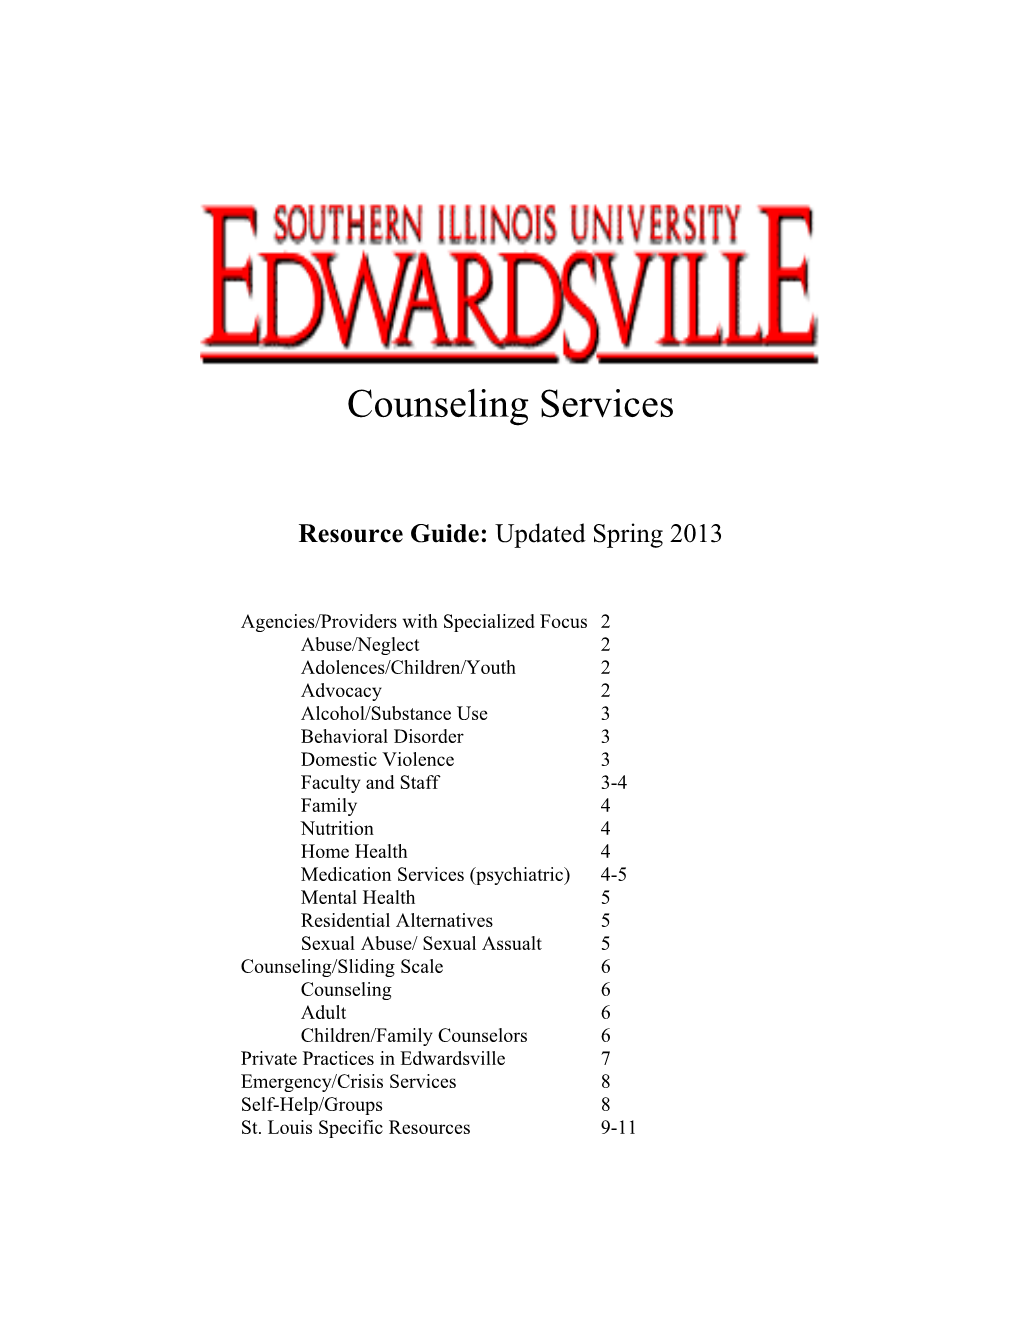 Resource Guide: Updated Spring 2013